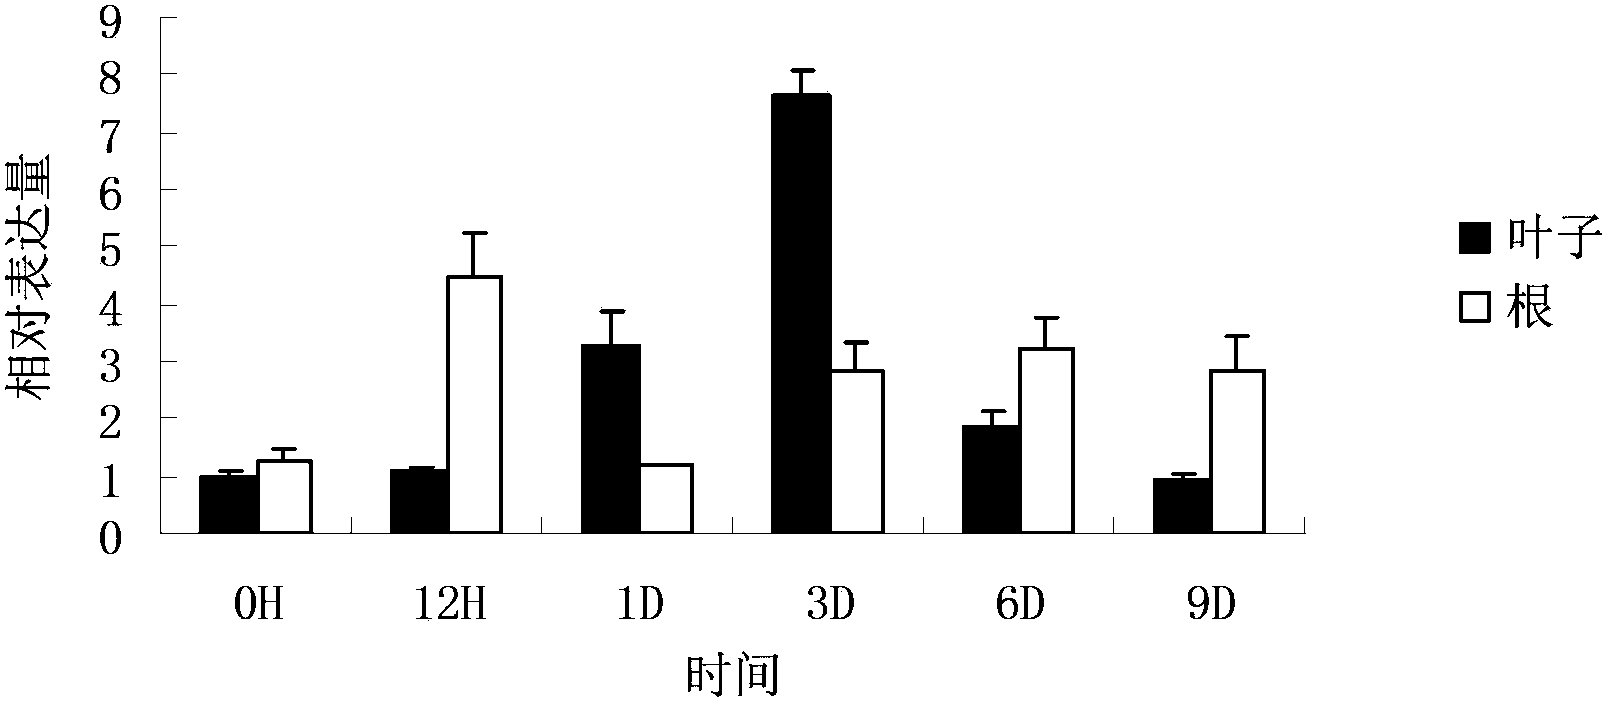 Malus xiaojinensis MxVHA-c protein and coding gene thereof, and application thereof